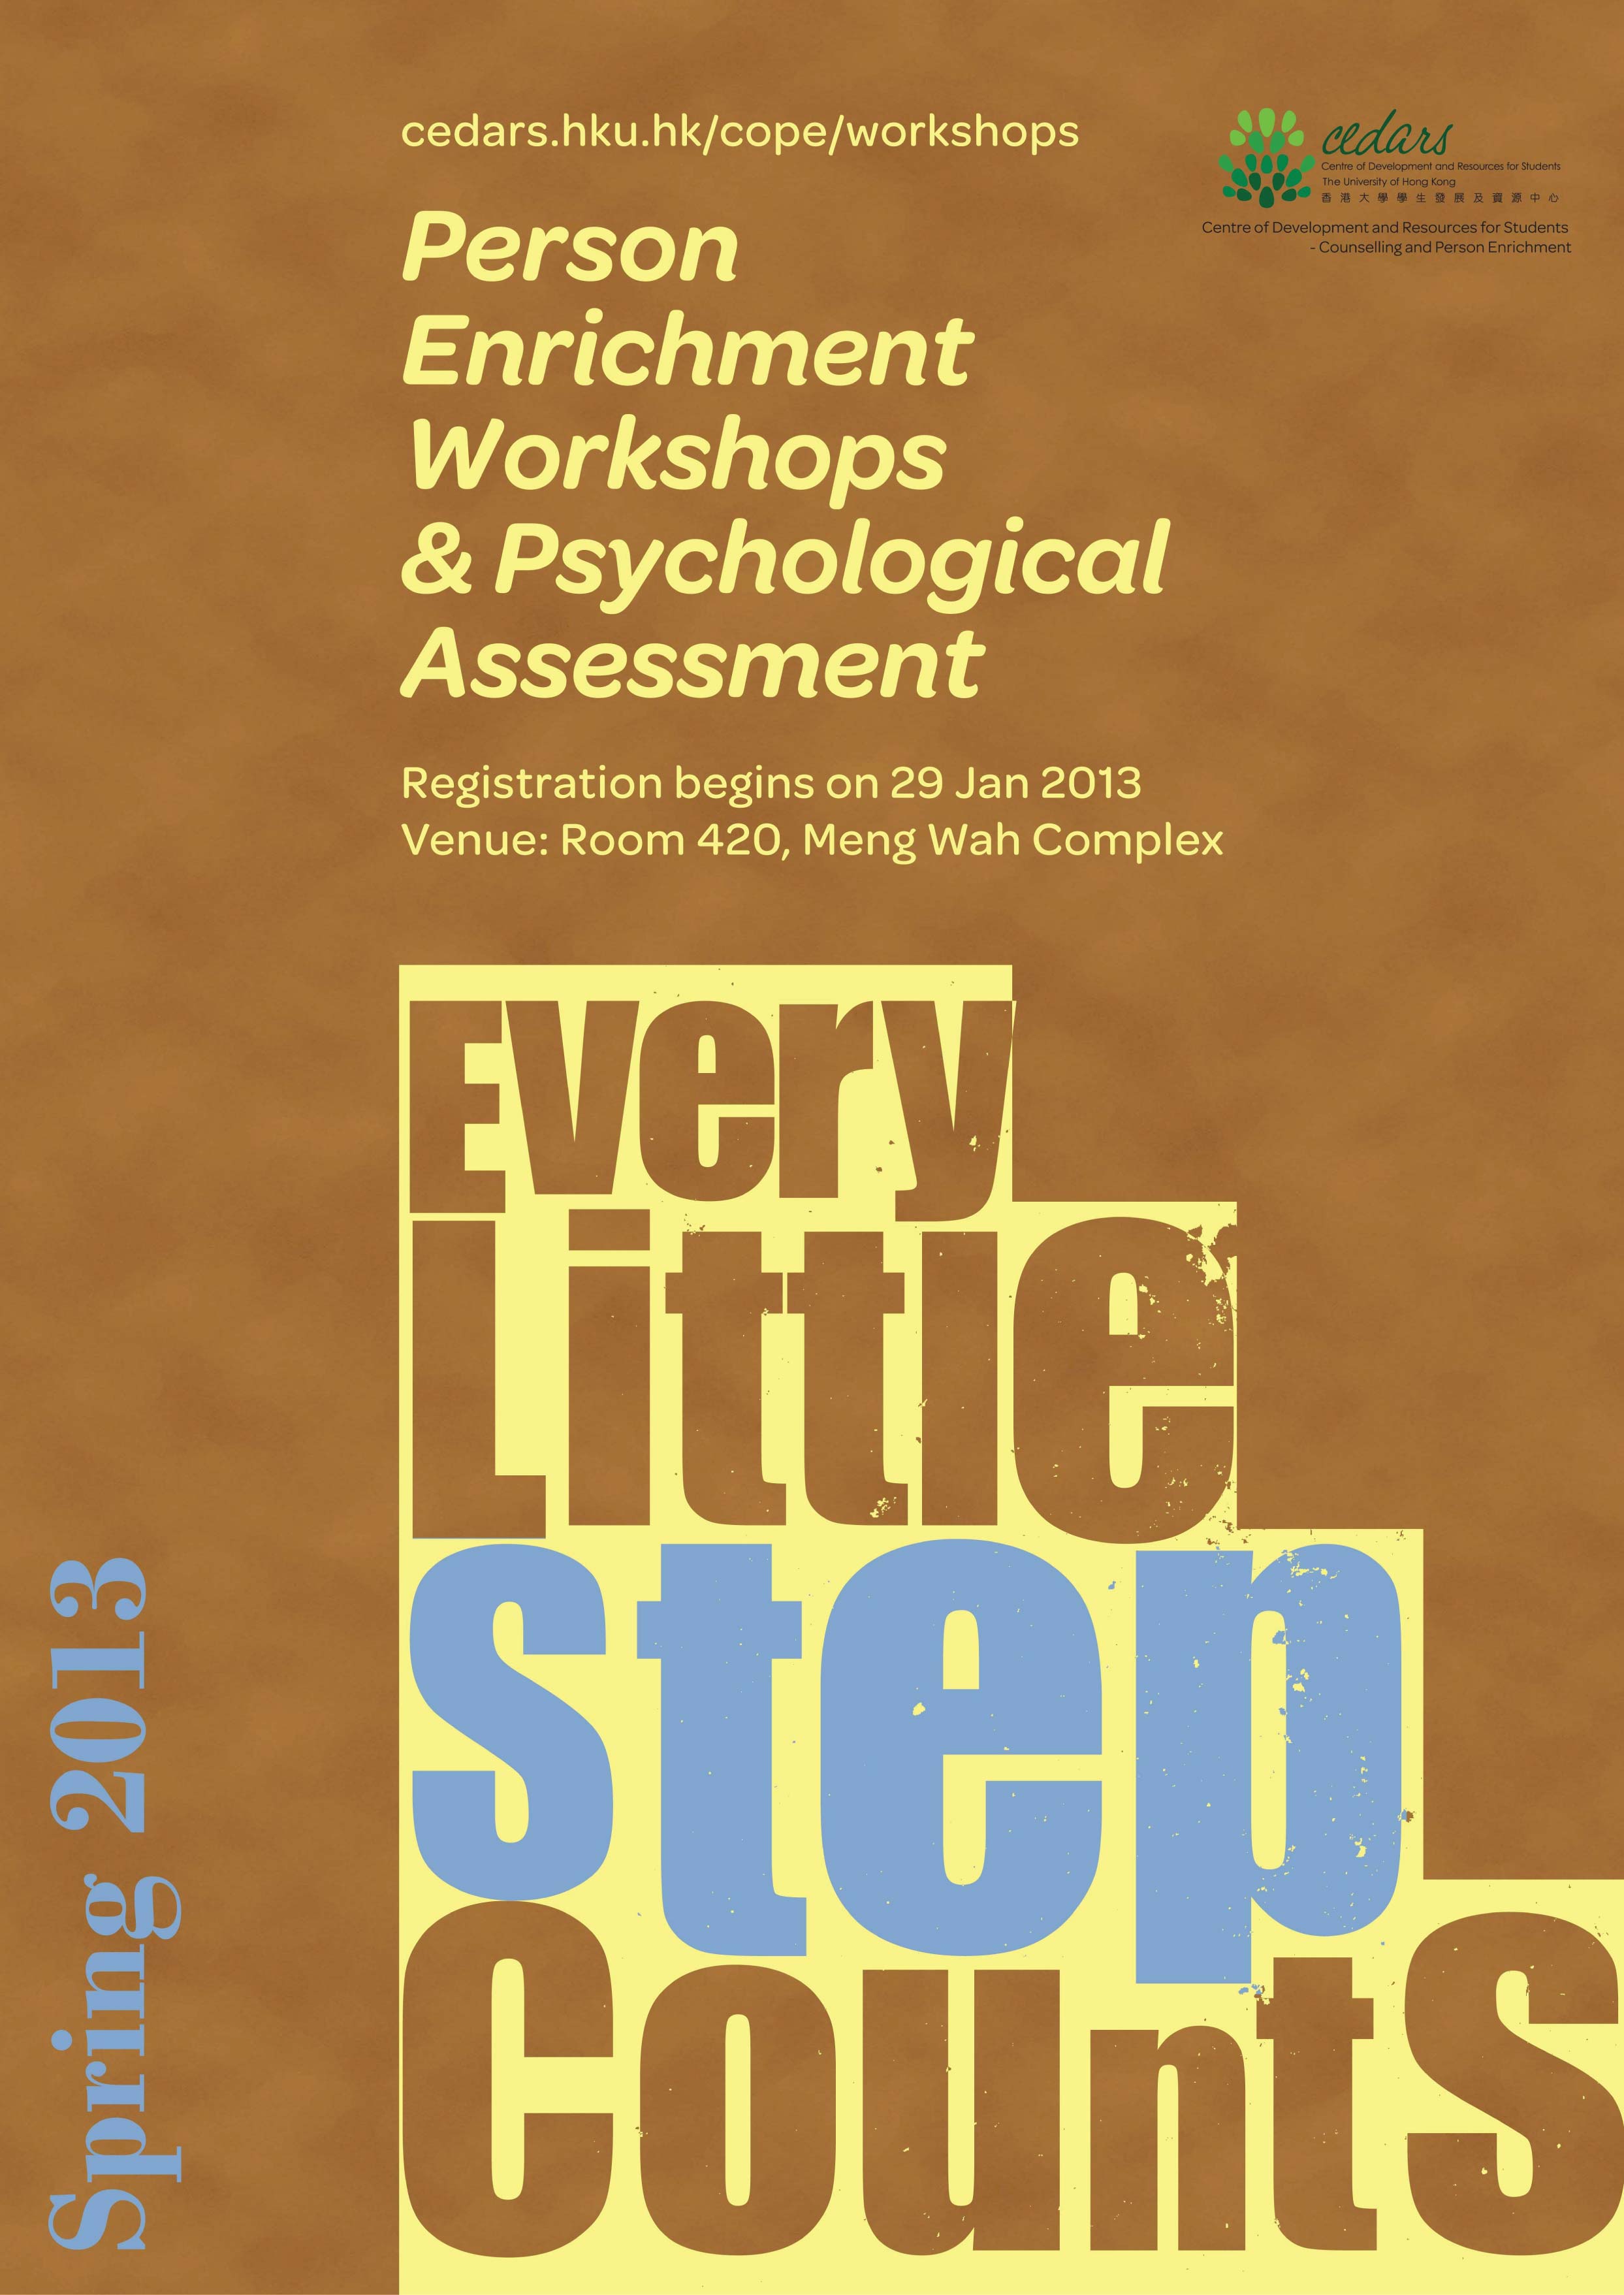 Every Little Step Counts! Enrol in Person Enrichment Workshops now!  